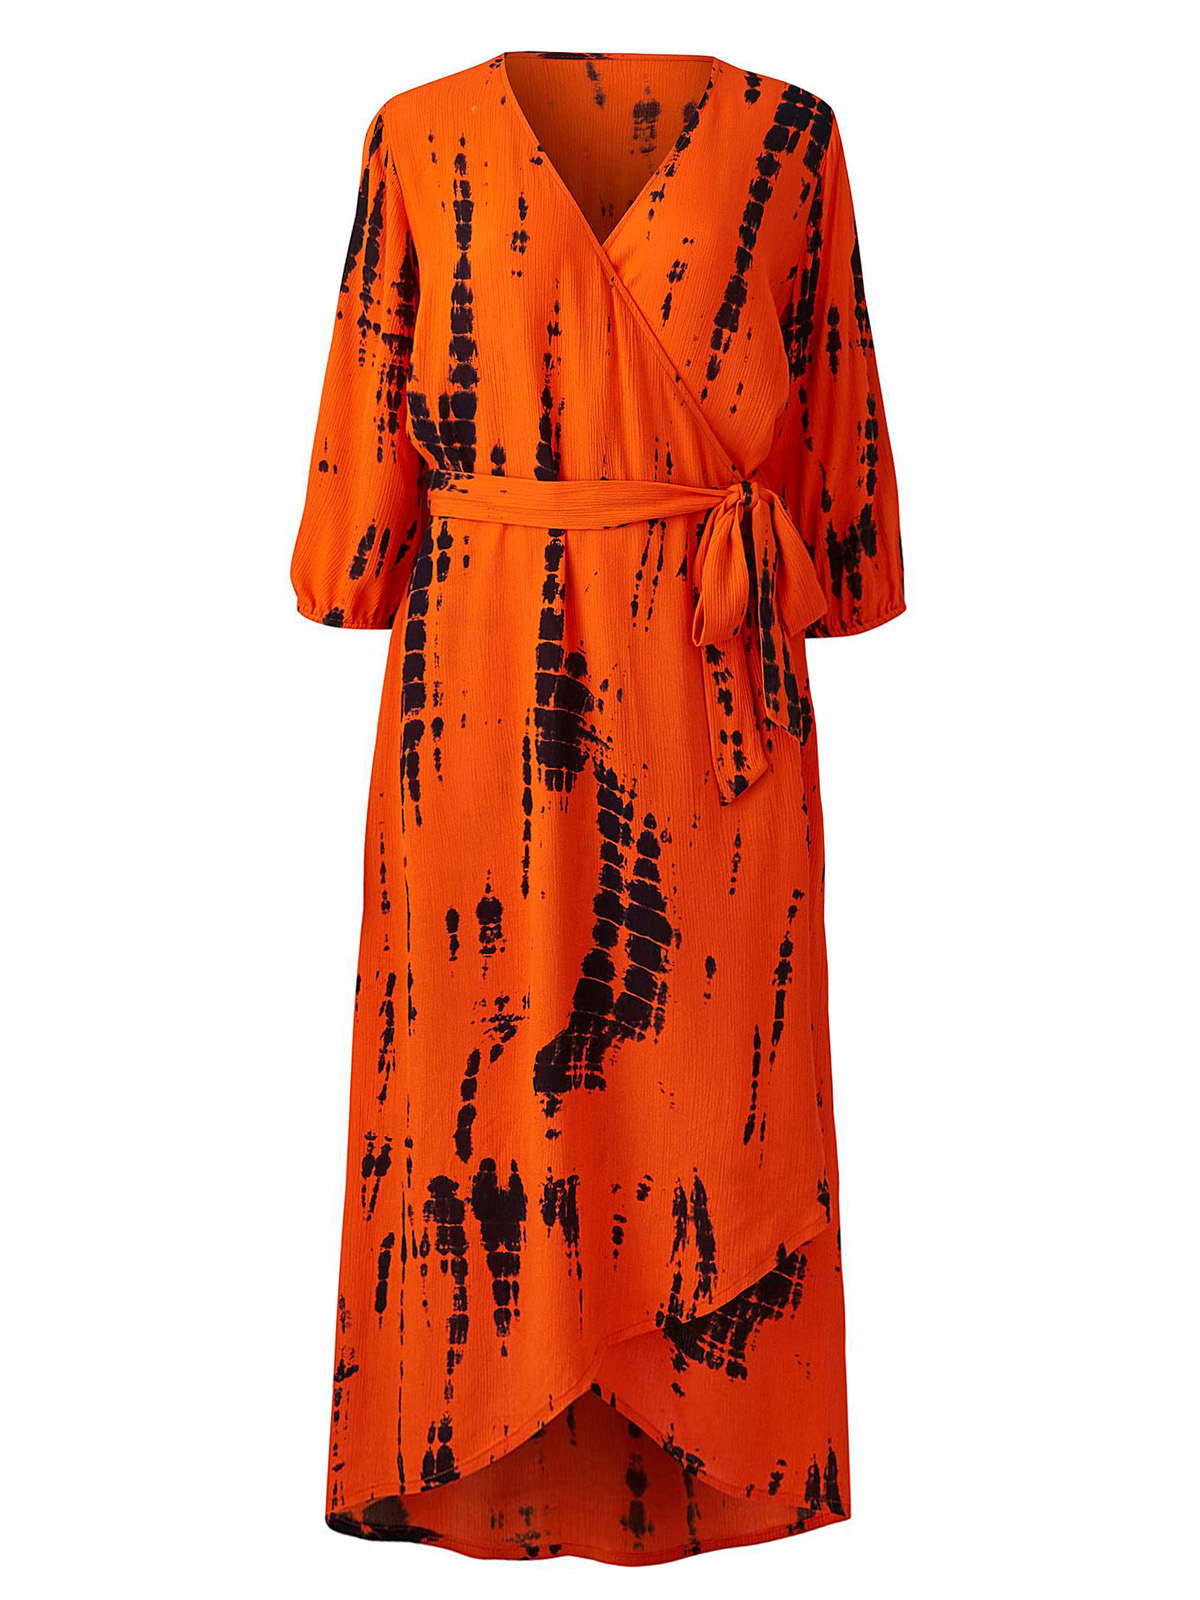 Plus Size wholesale clothing by simply be - - SimplyBe ORANGE Tie Dye  Crinkle Wrap Dress - Plus Size 12 to 32